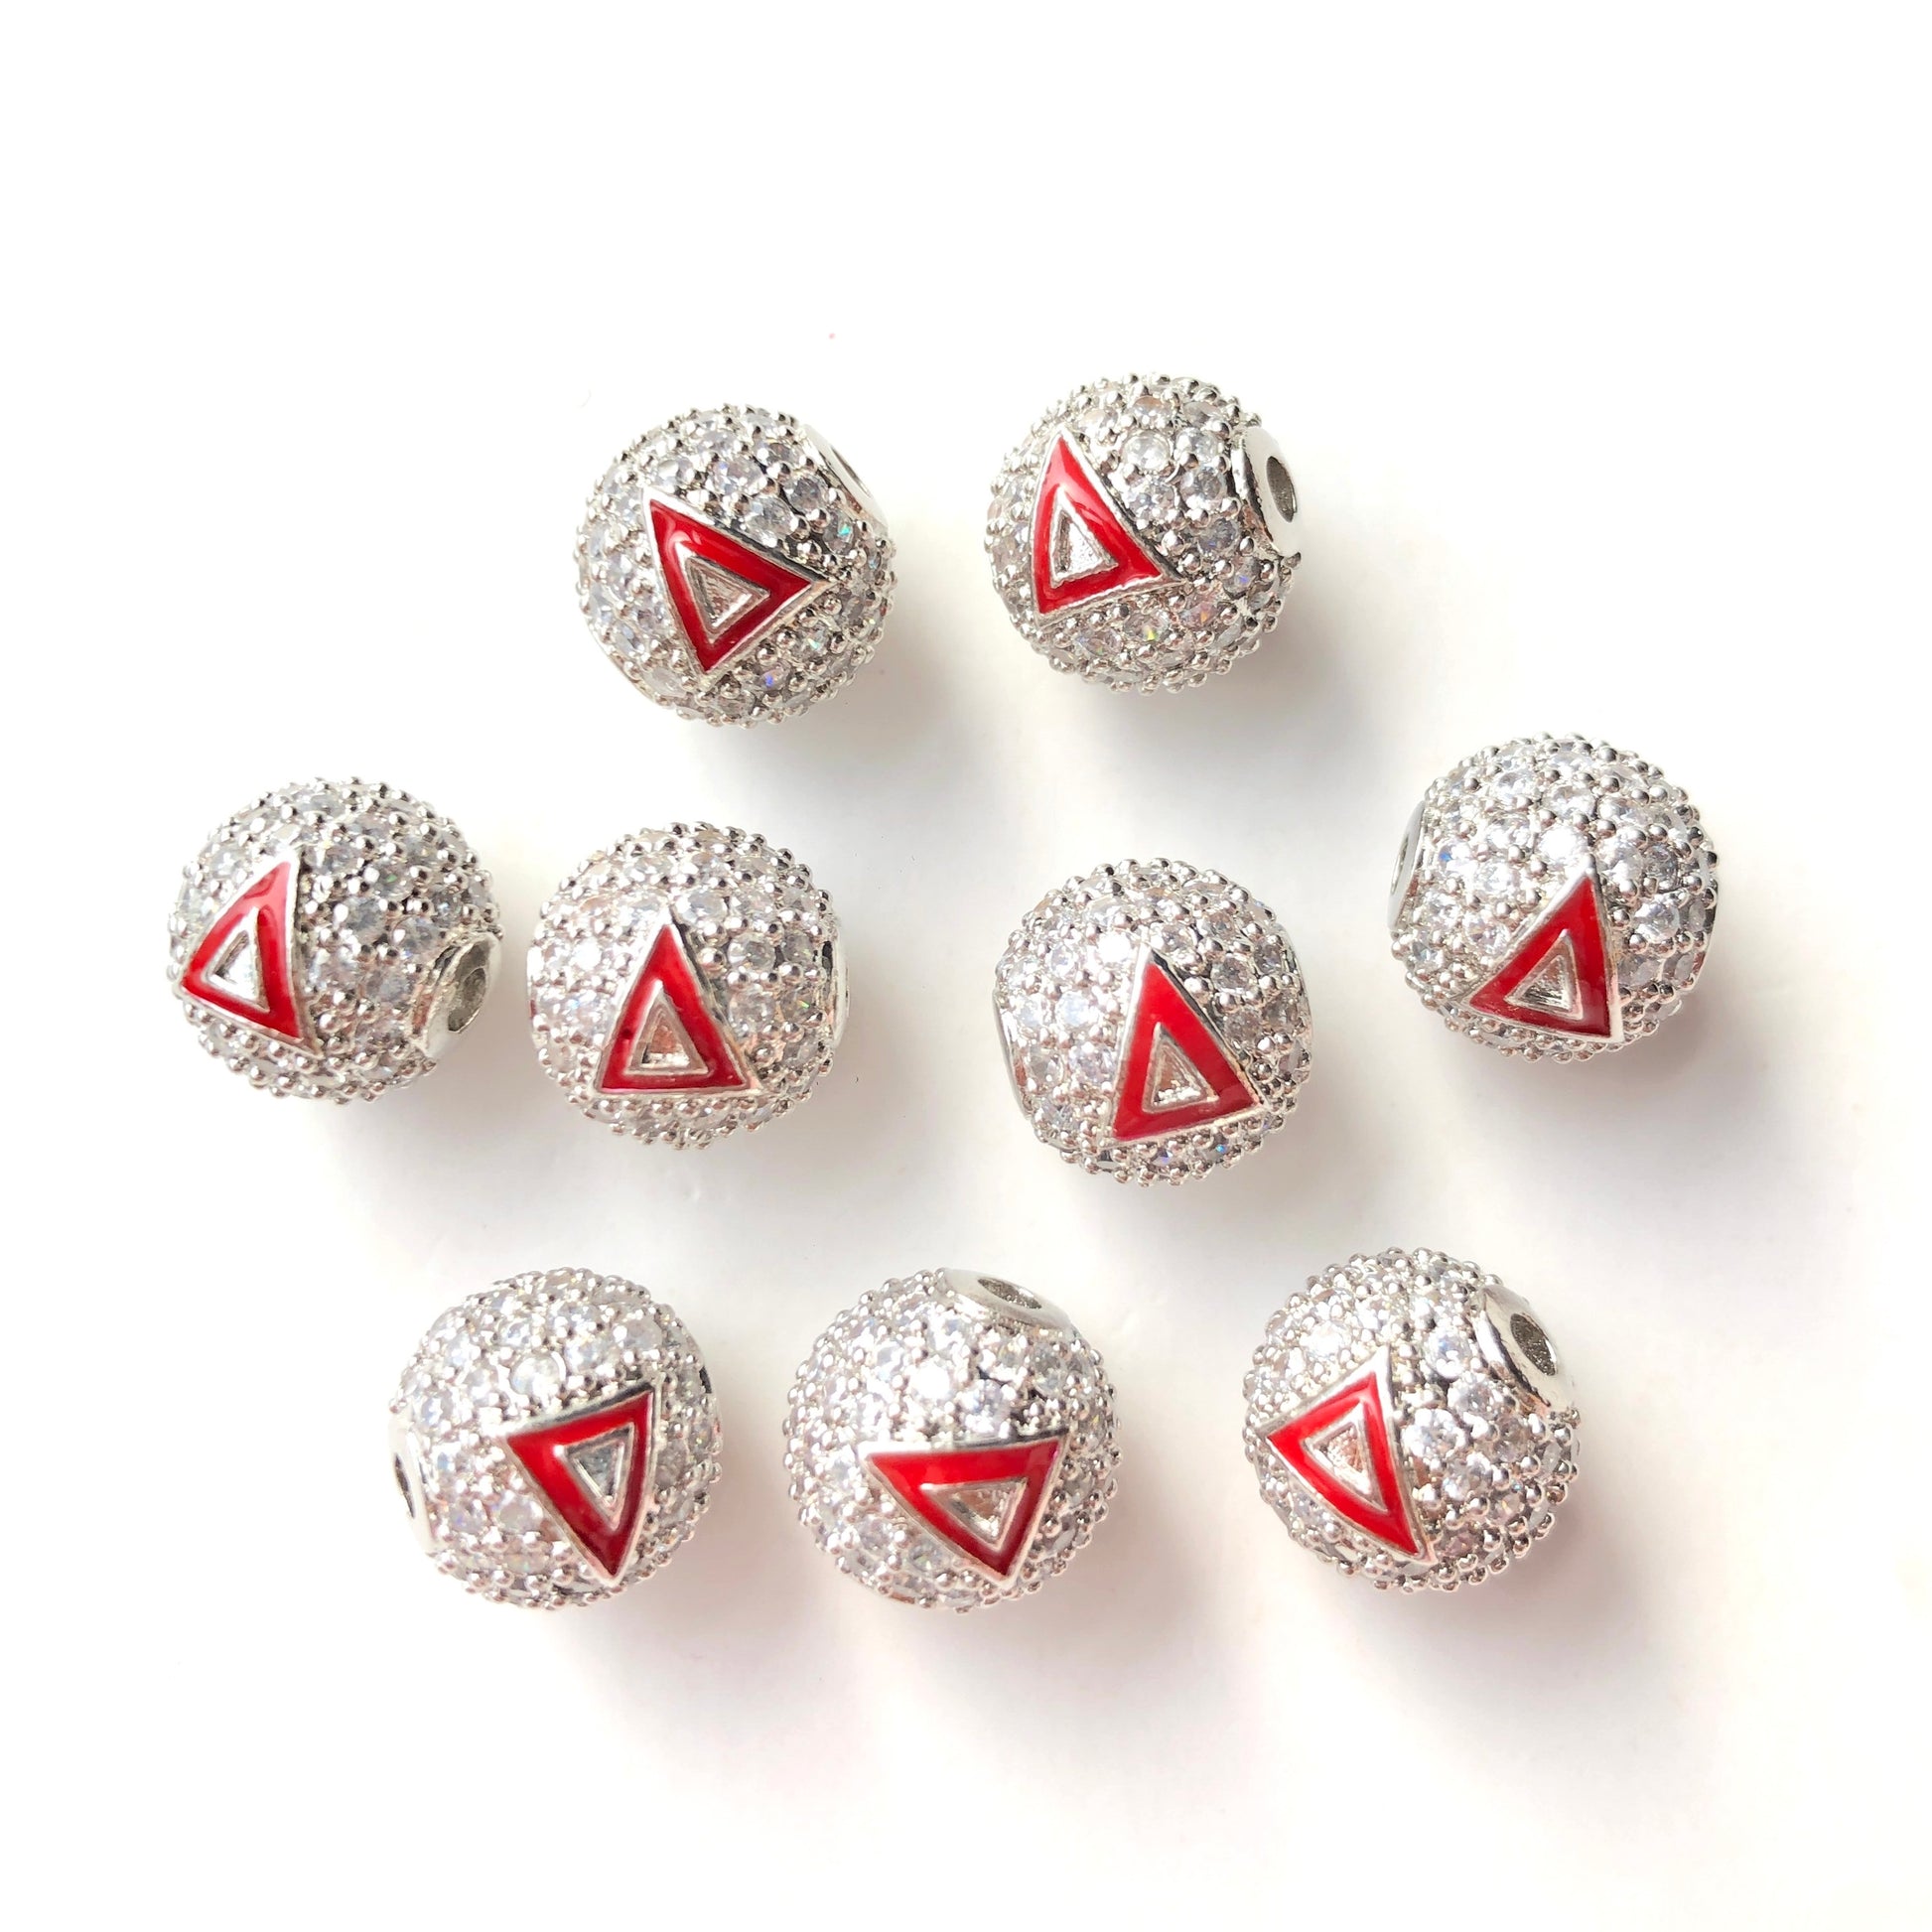 12pcs/lot 10mm Red Enamel CZ Paved Greek Letter "Δ", "Σ", "Θ" Ball Spacers Beads 12 Silver Δ CZ Paved Spacers 10mm Beads Ball Beads Greek Letters New Spacers Arrivals Charms Beads Beyond